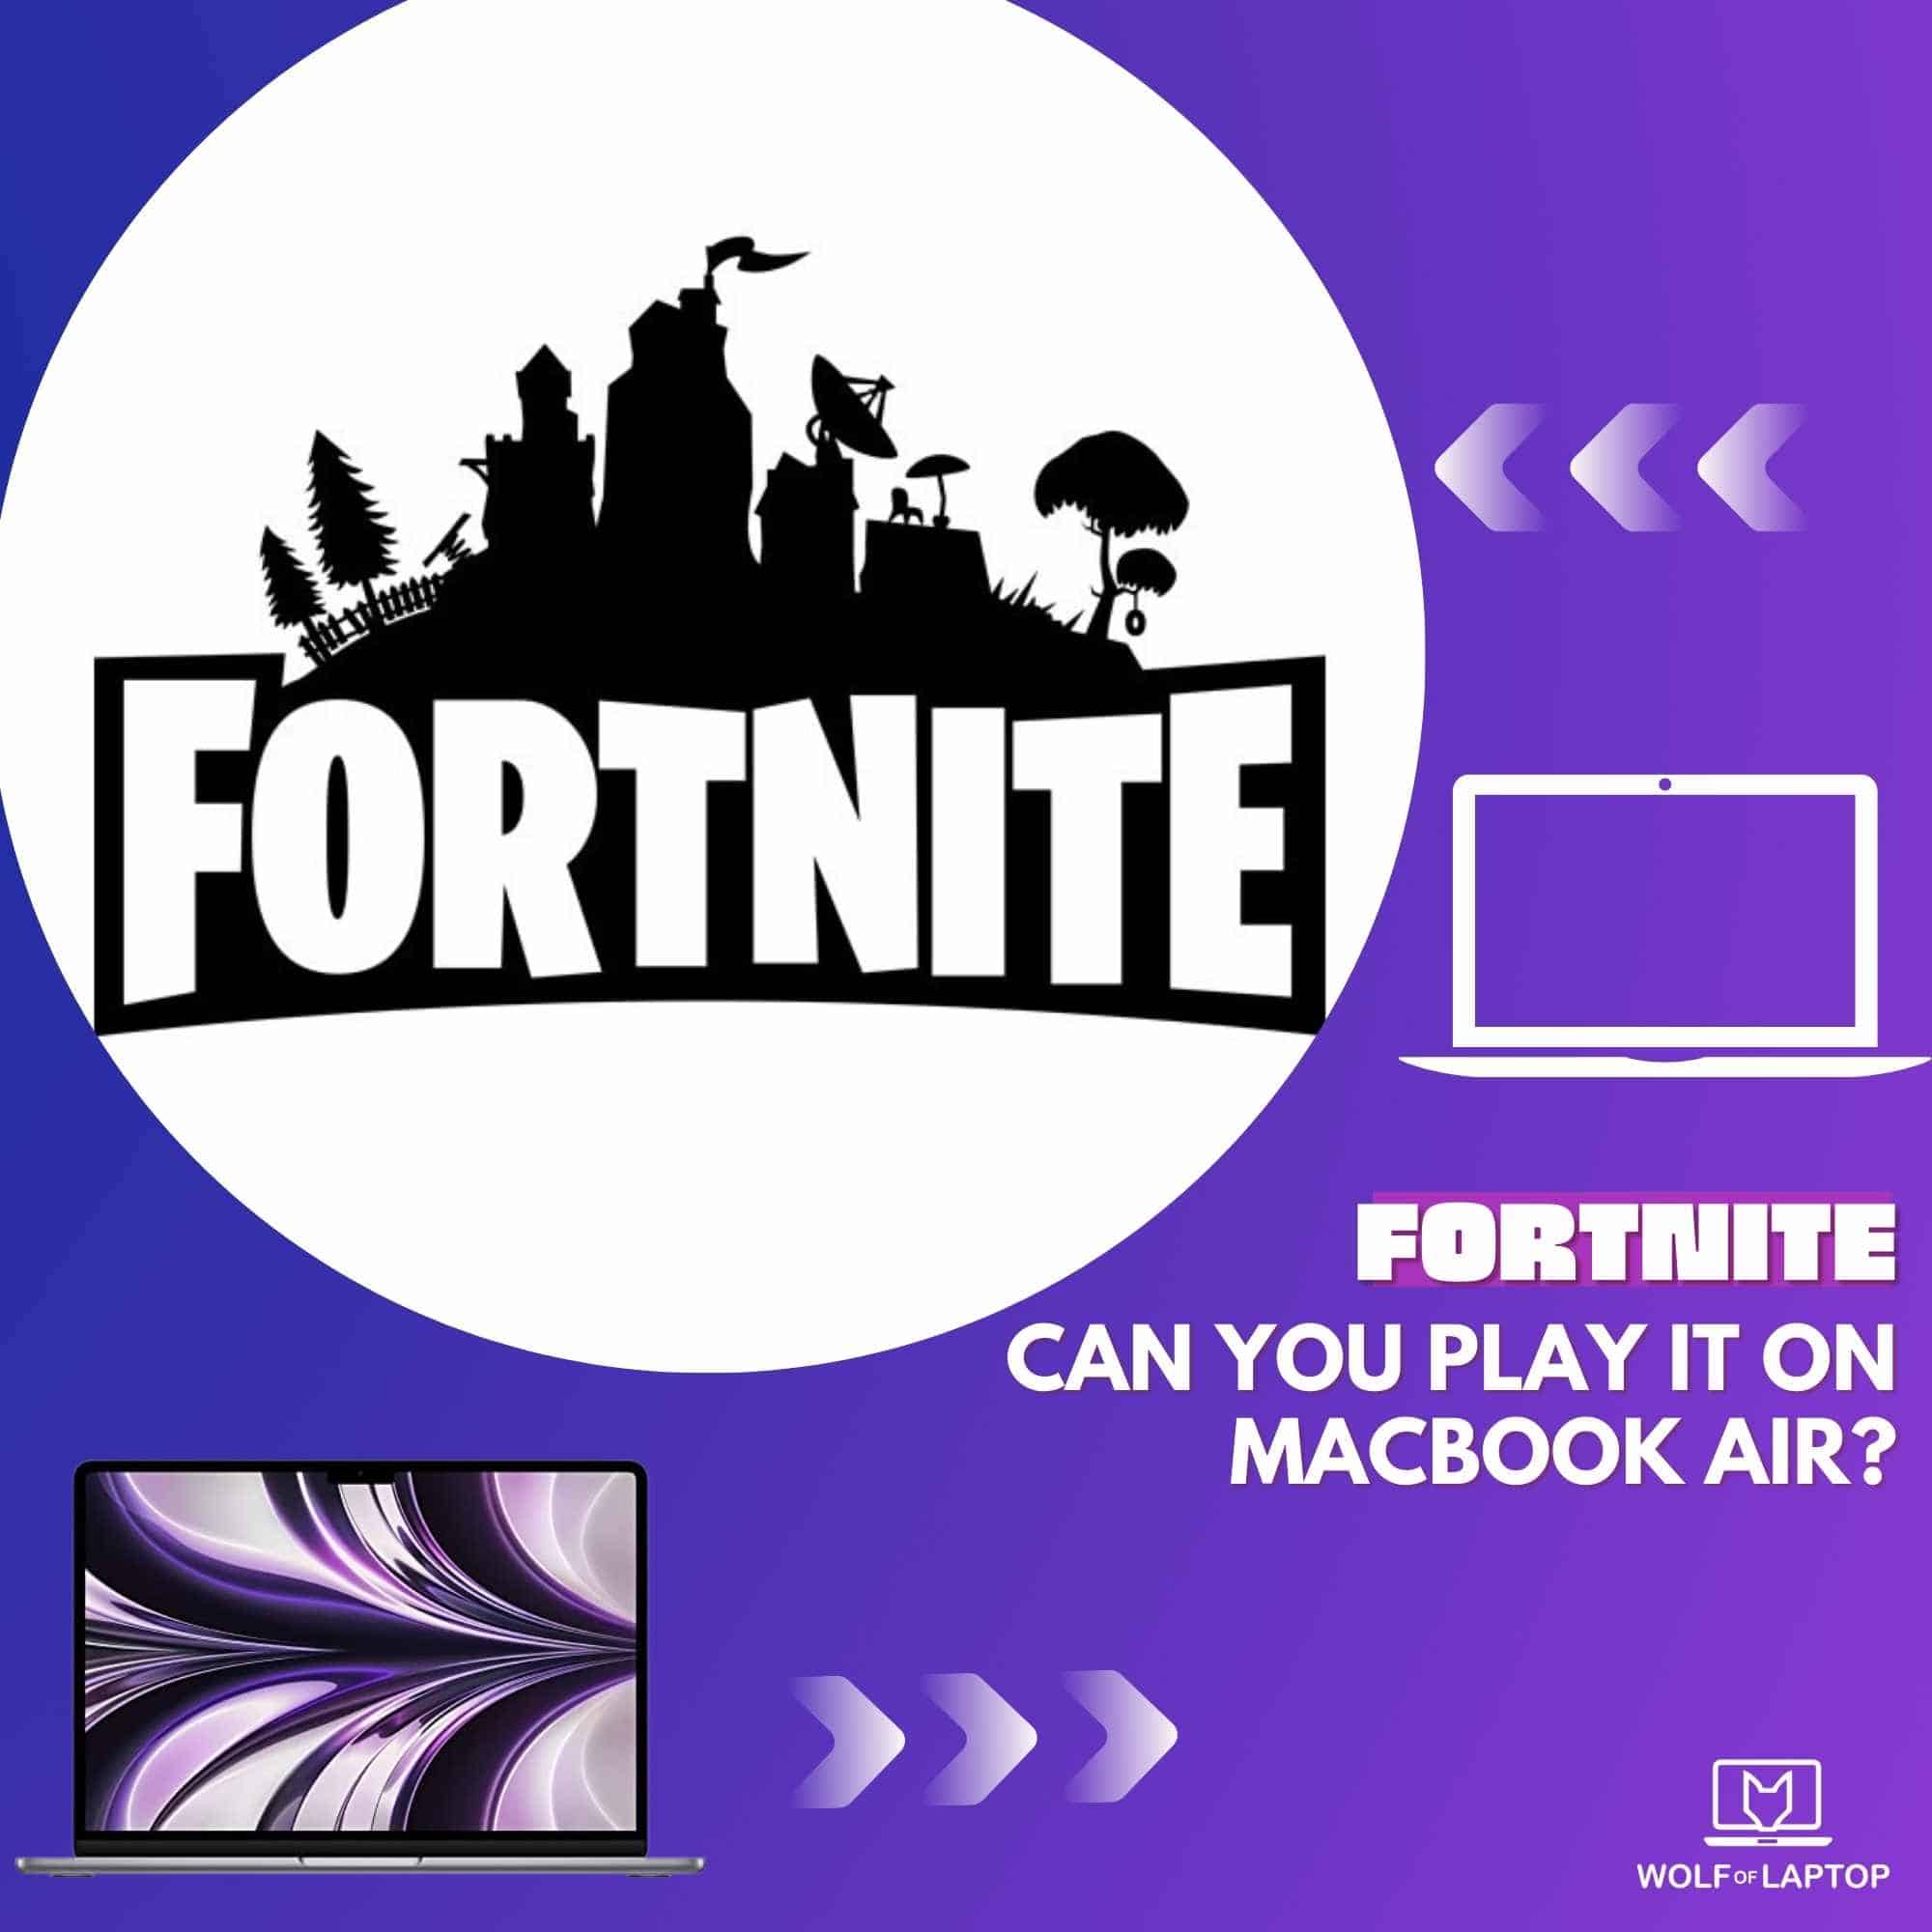 can you play fortnite on macbook air - answered